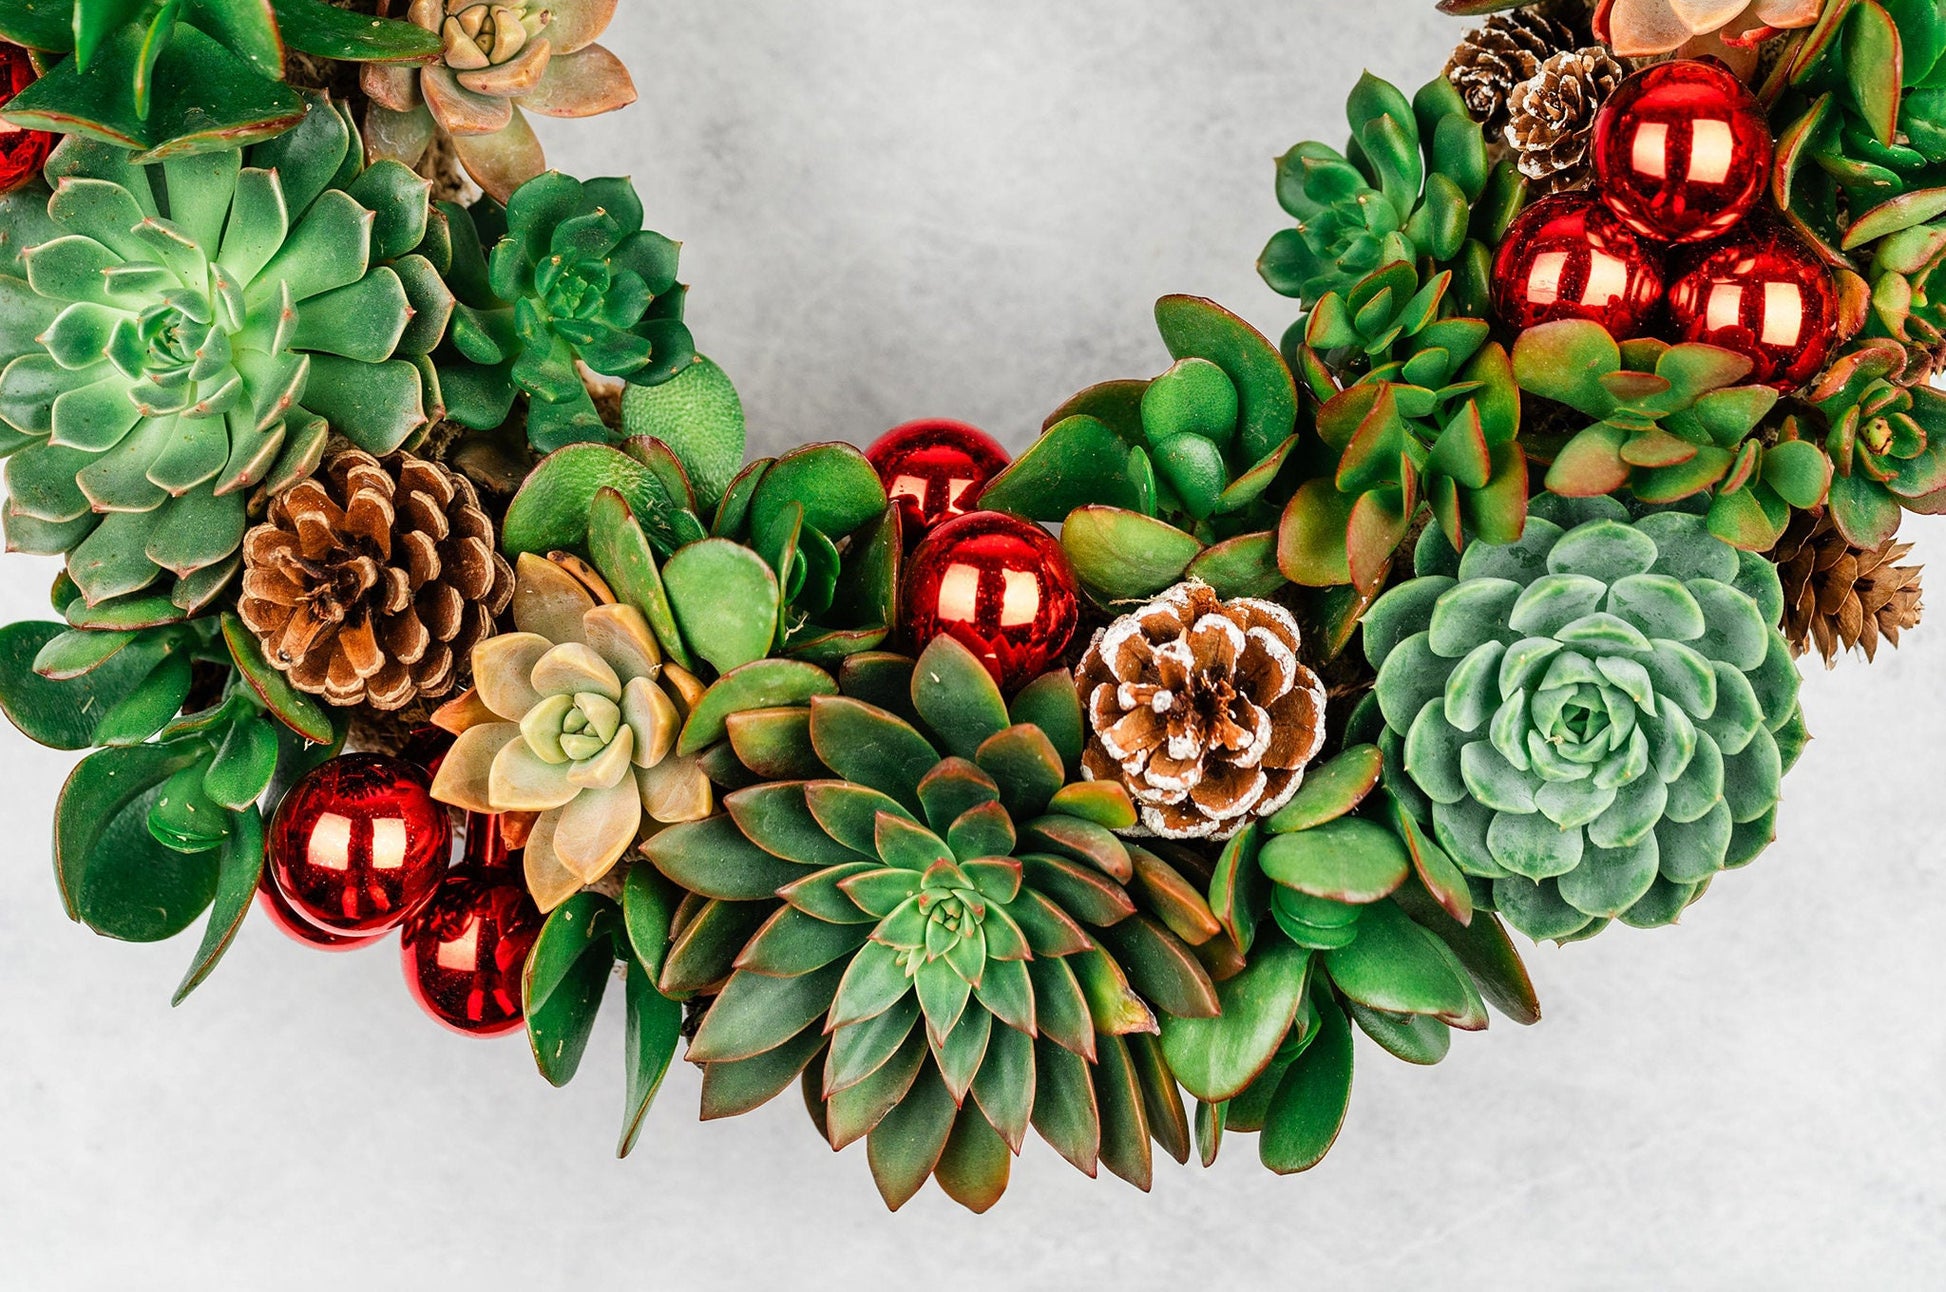 Christmas Succulent Wreath with Living Green and Red Plants, Ornaments, and Pine Cones for Front Door Entry, Holiday Decorating